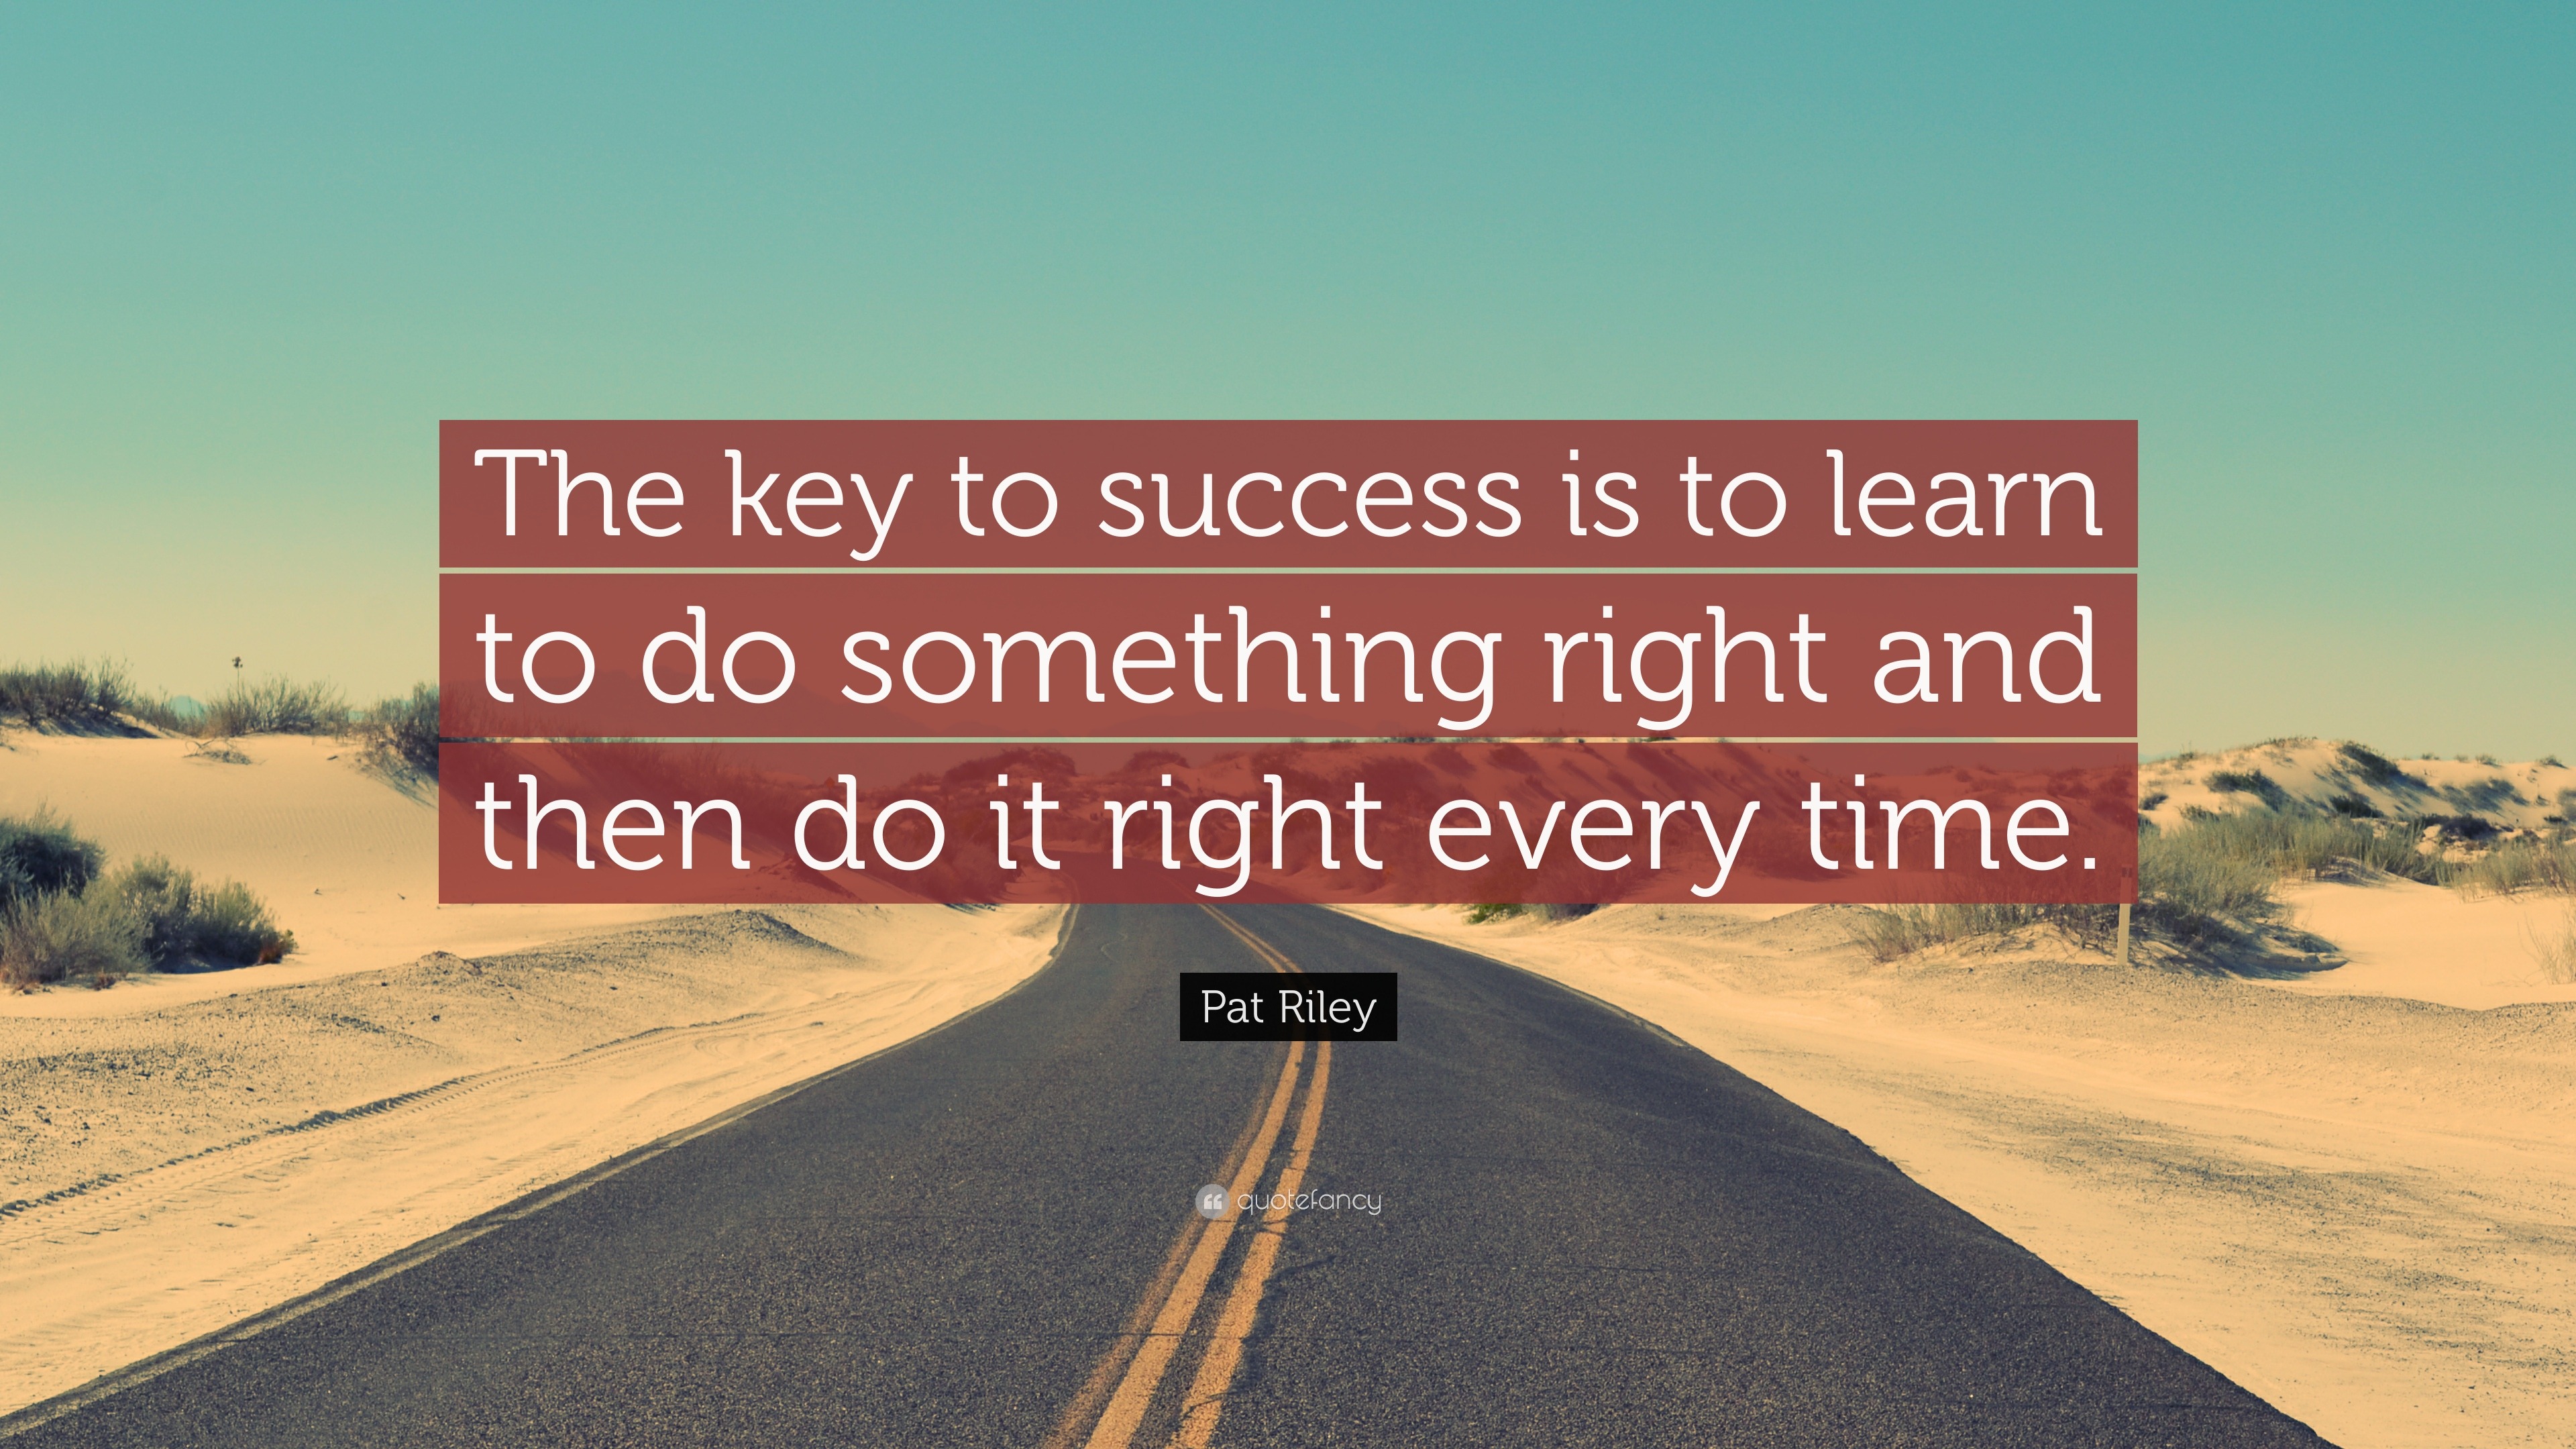 Pat Riley Quote: “The key to success is to learn to do something right ...